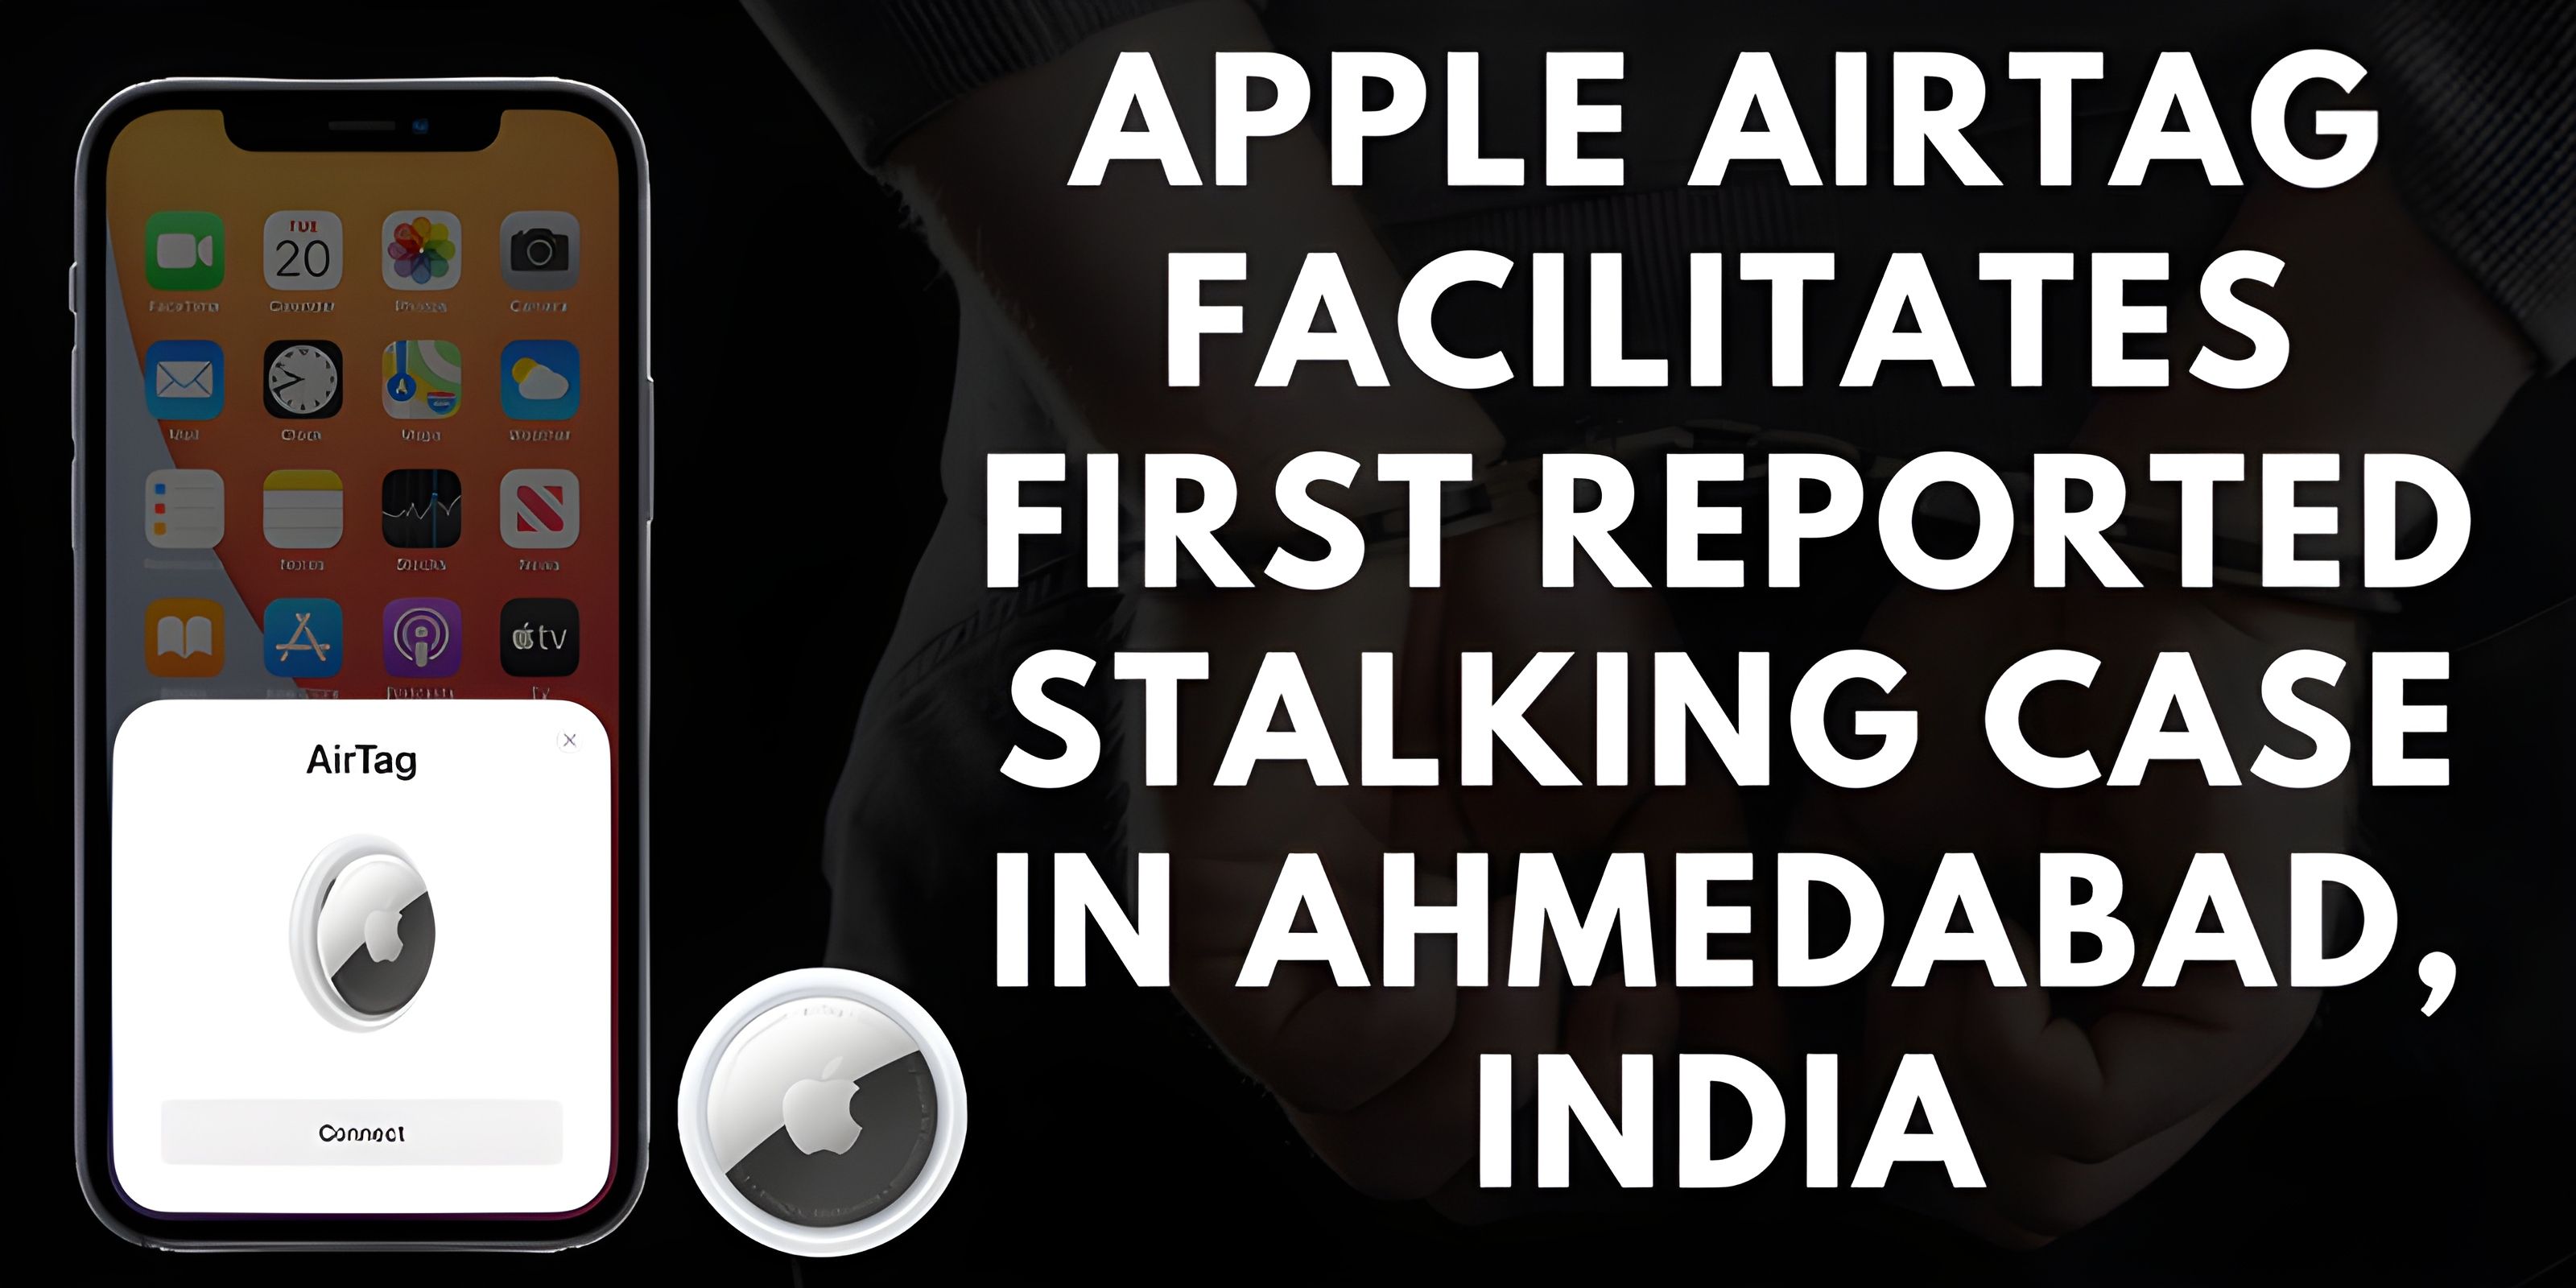 Apple AirTag Facilitates First Reported Stalking Case in Ahmedabad, India